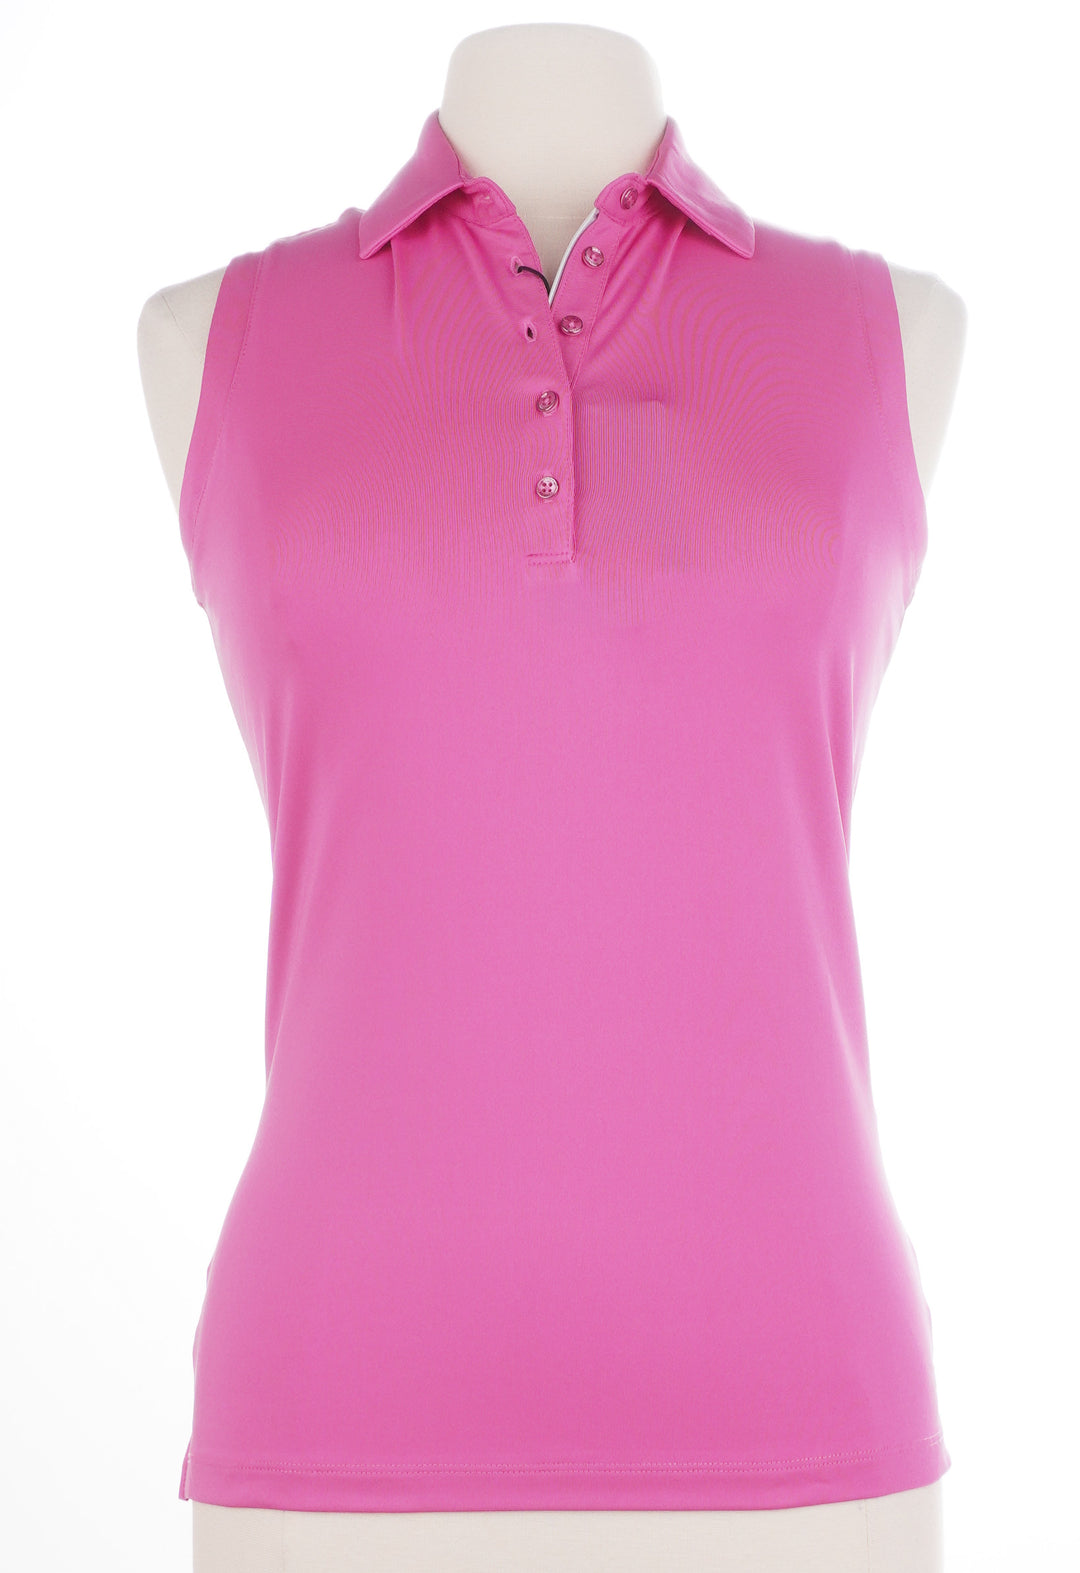 Dunning Golf Player Jersey Performance Sleeveless Top - Lily - Size Small - Skorzie